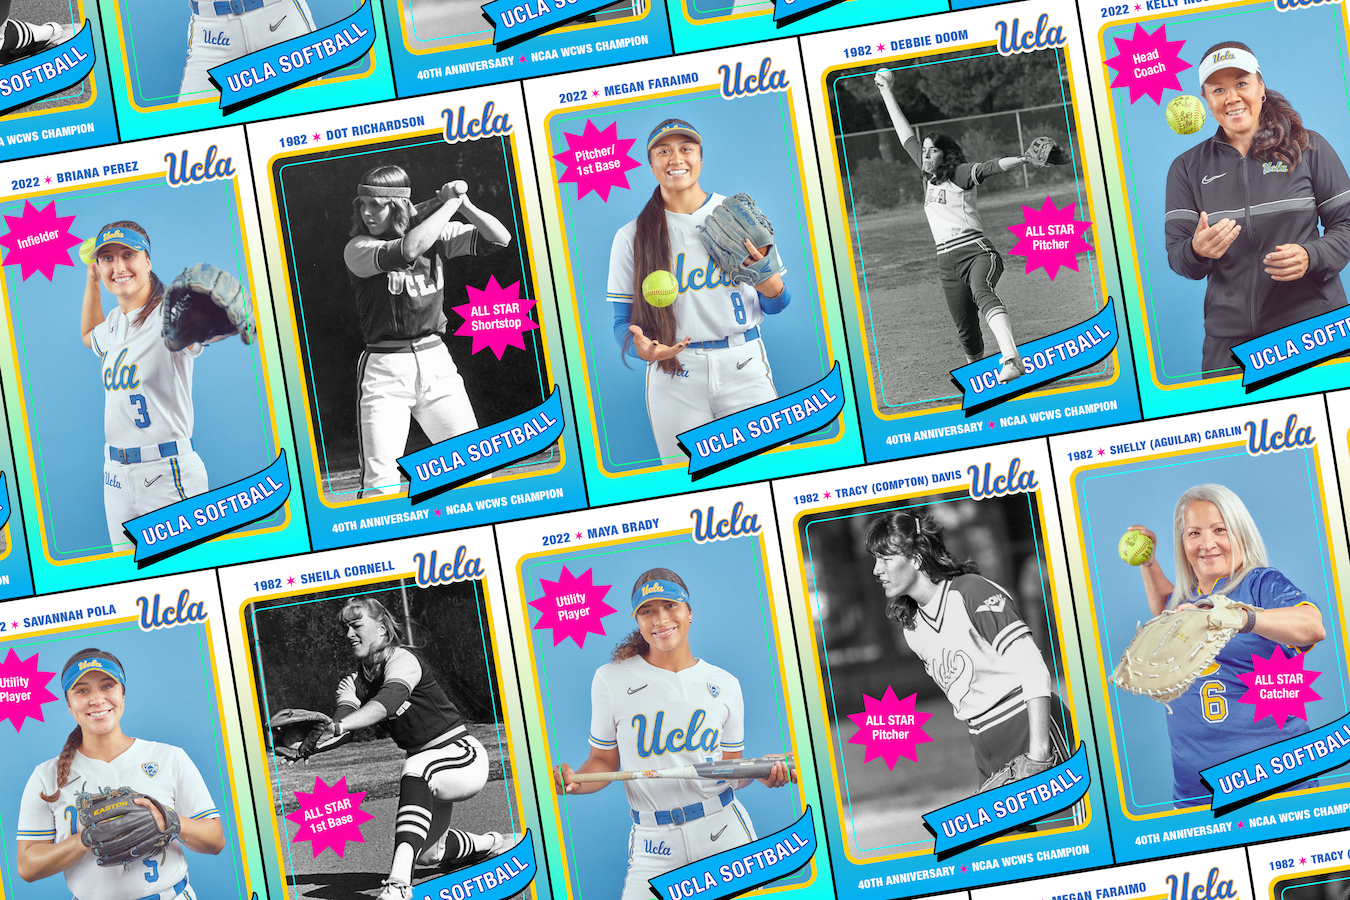 Collage of baseball cards featuring players from UCLA’s 1982 softball team